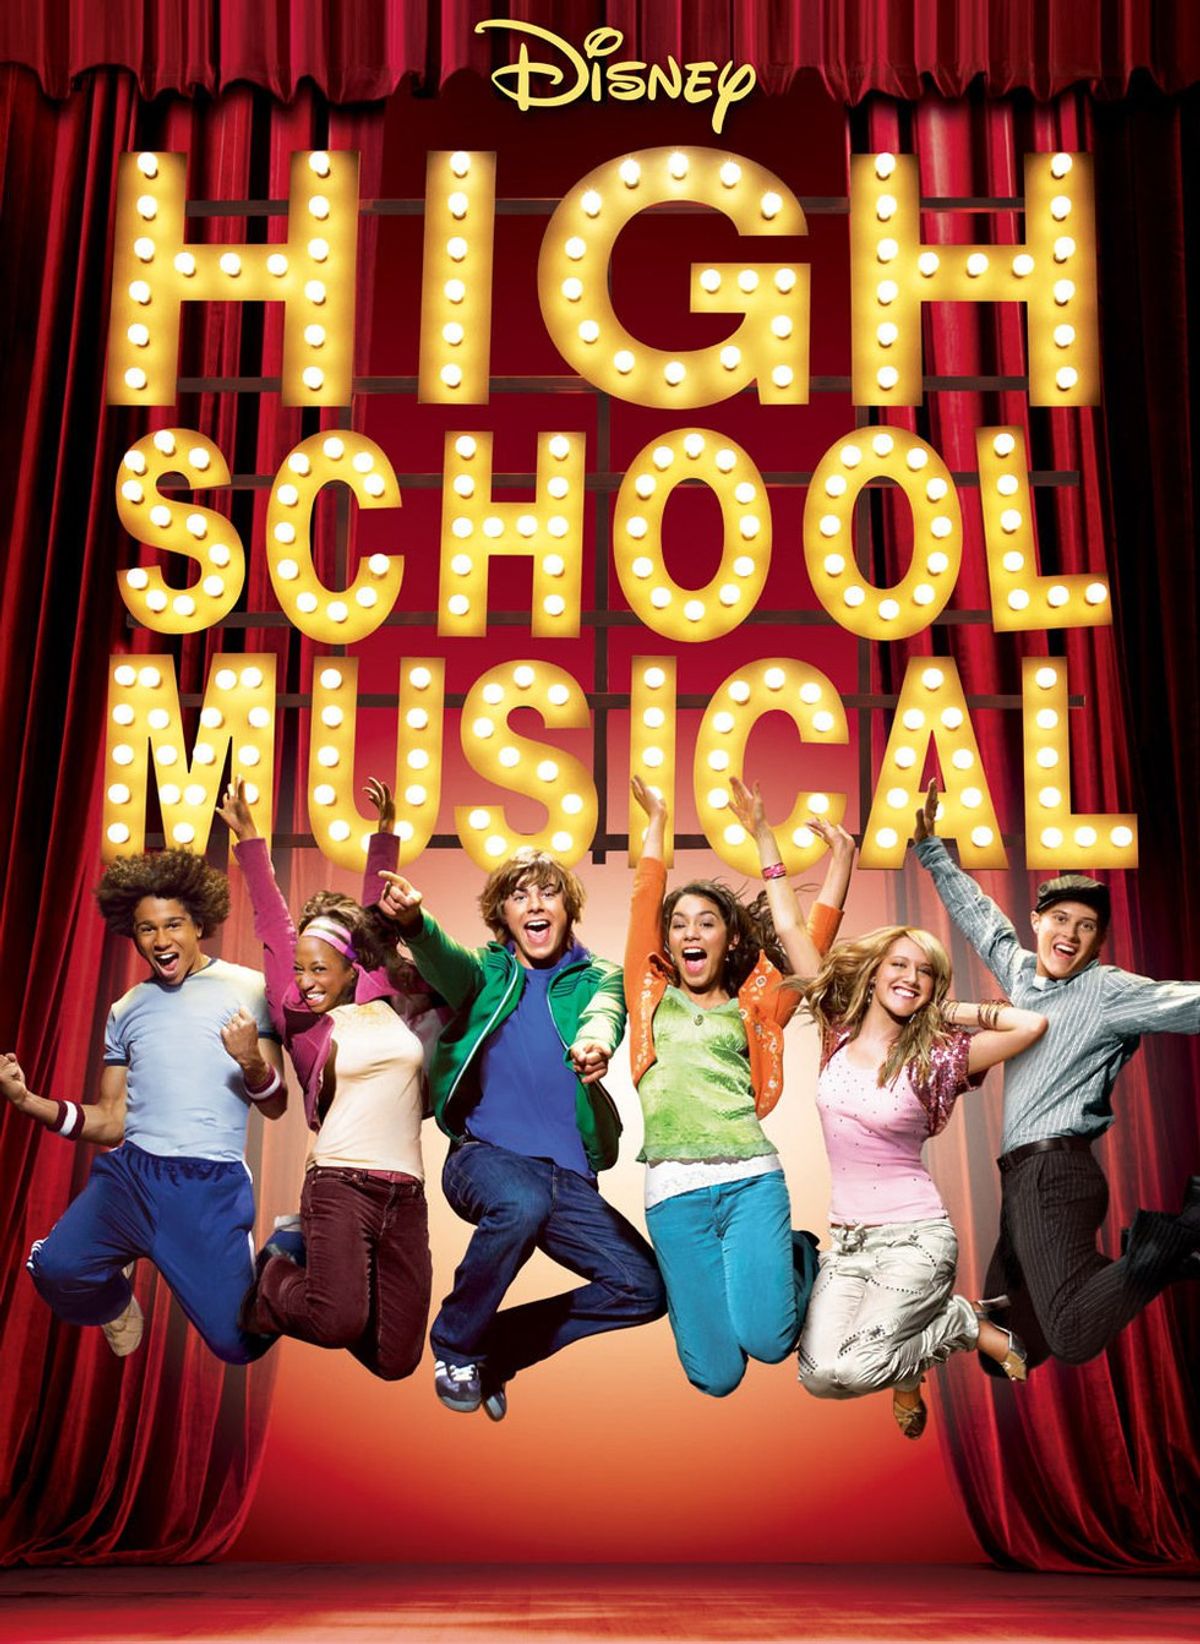 Unrealistic Expectations Set By 'High School Musical'